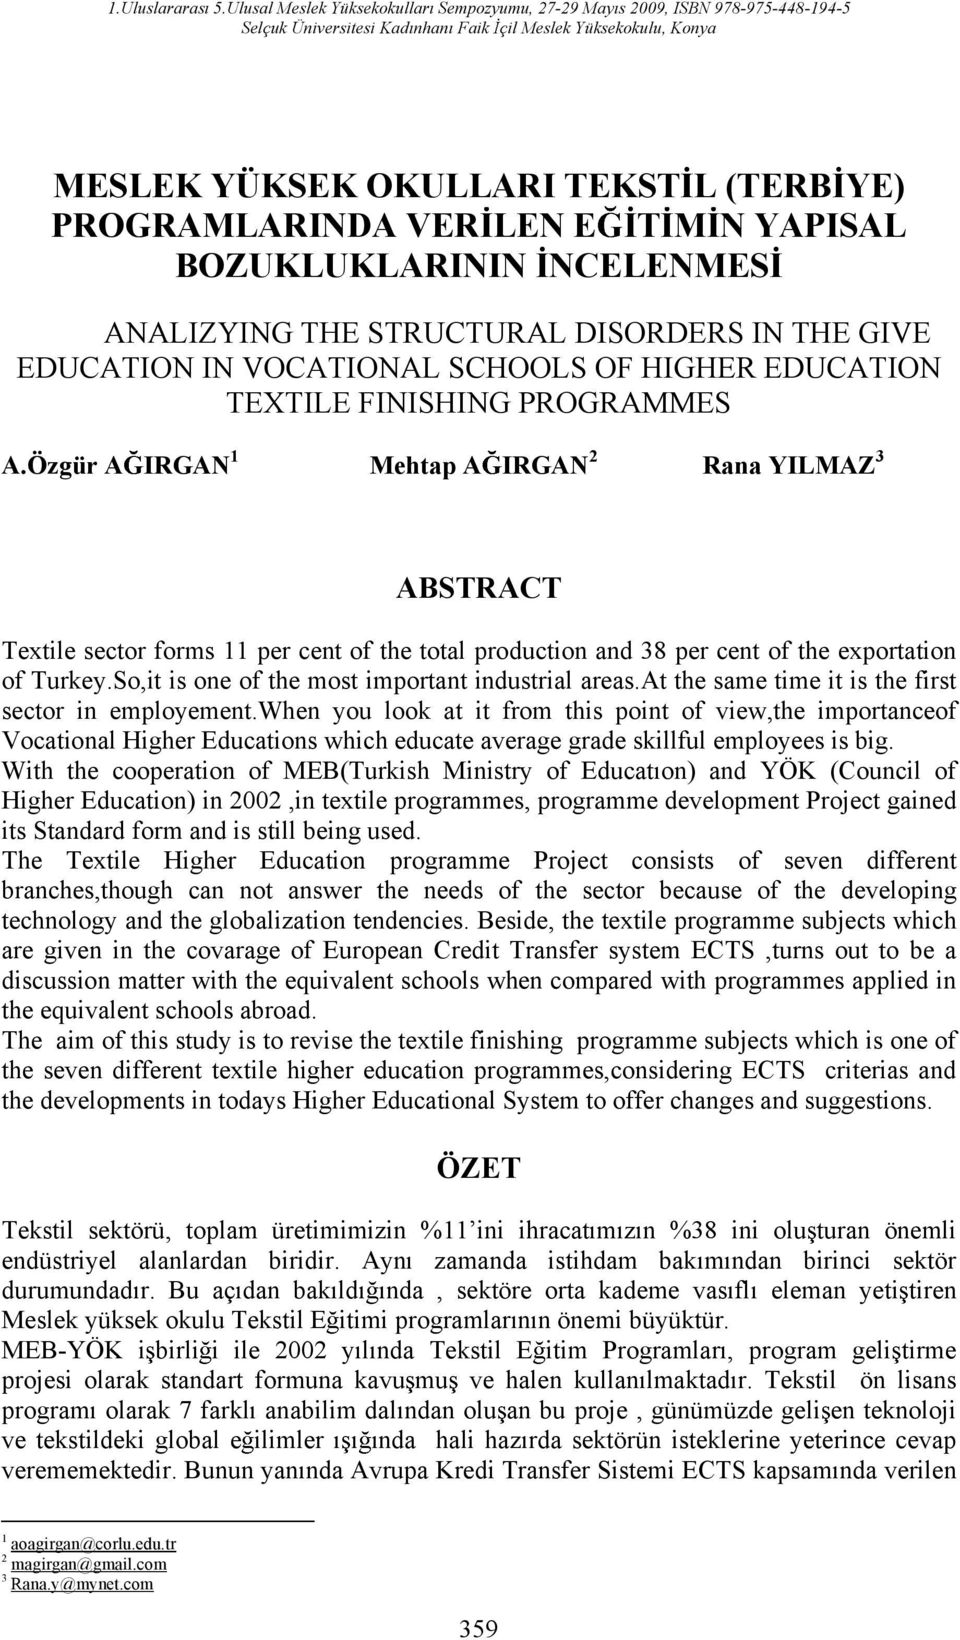 YAPIAL BOUKLUKLARININ NCELENME ANALIYING THE TRUCTURAL DIORDER IN THE GIVE EDUCATION IN VOCATIONAL CHOOL OF HIGHER EDUCATION TEXTILE FINIHING PROGRAMME A.